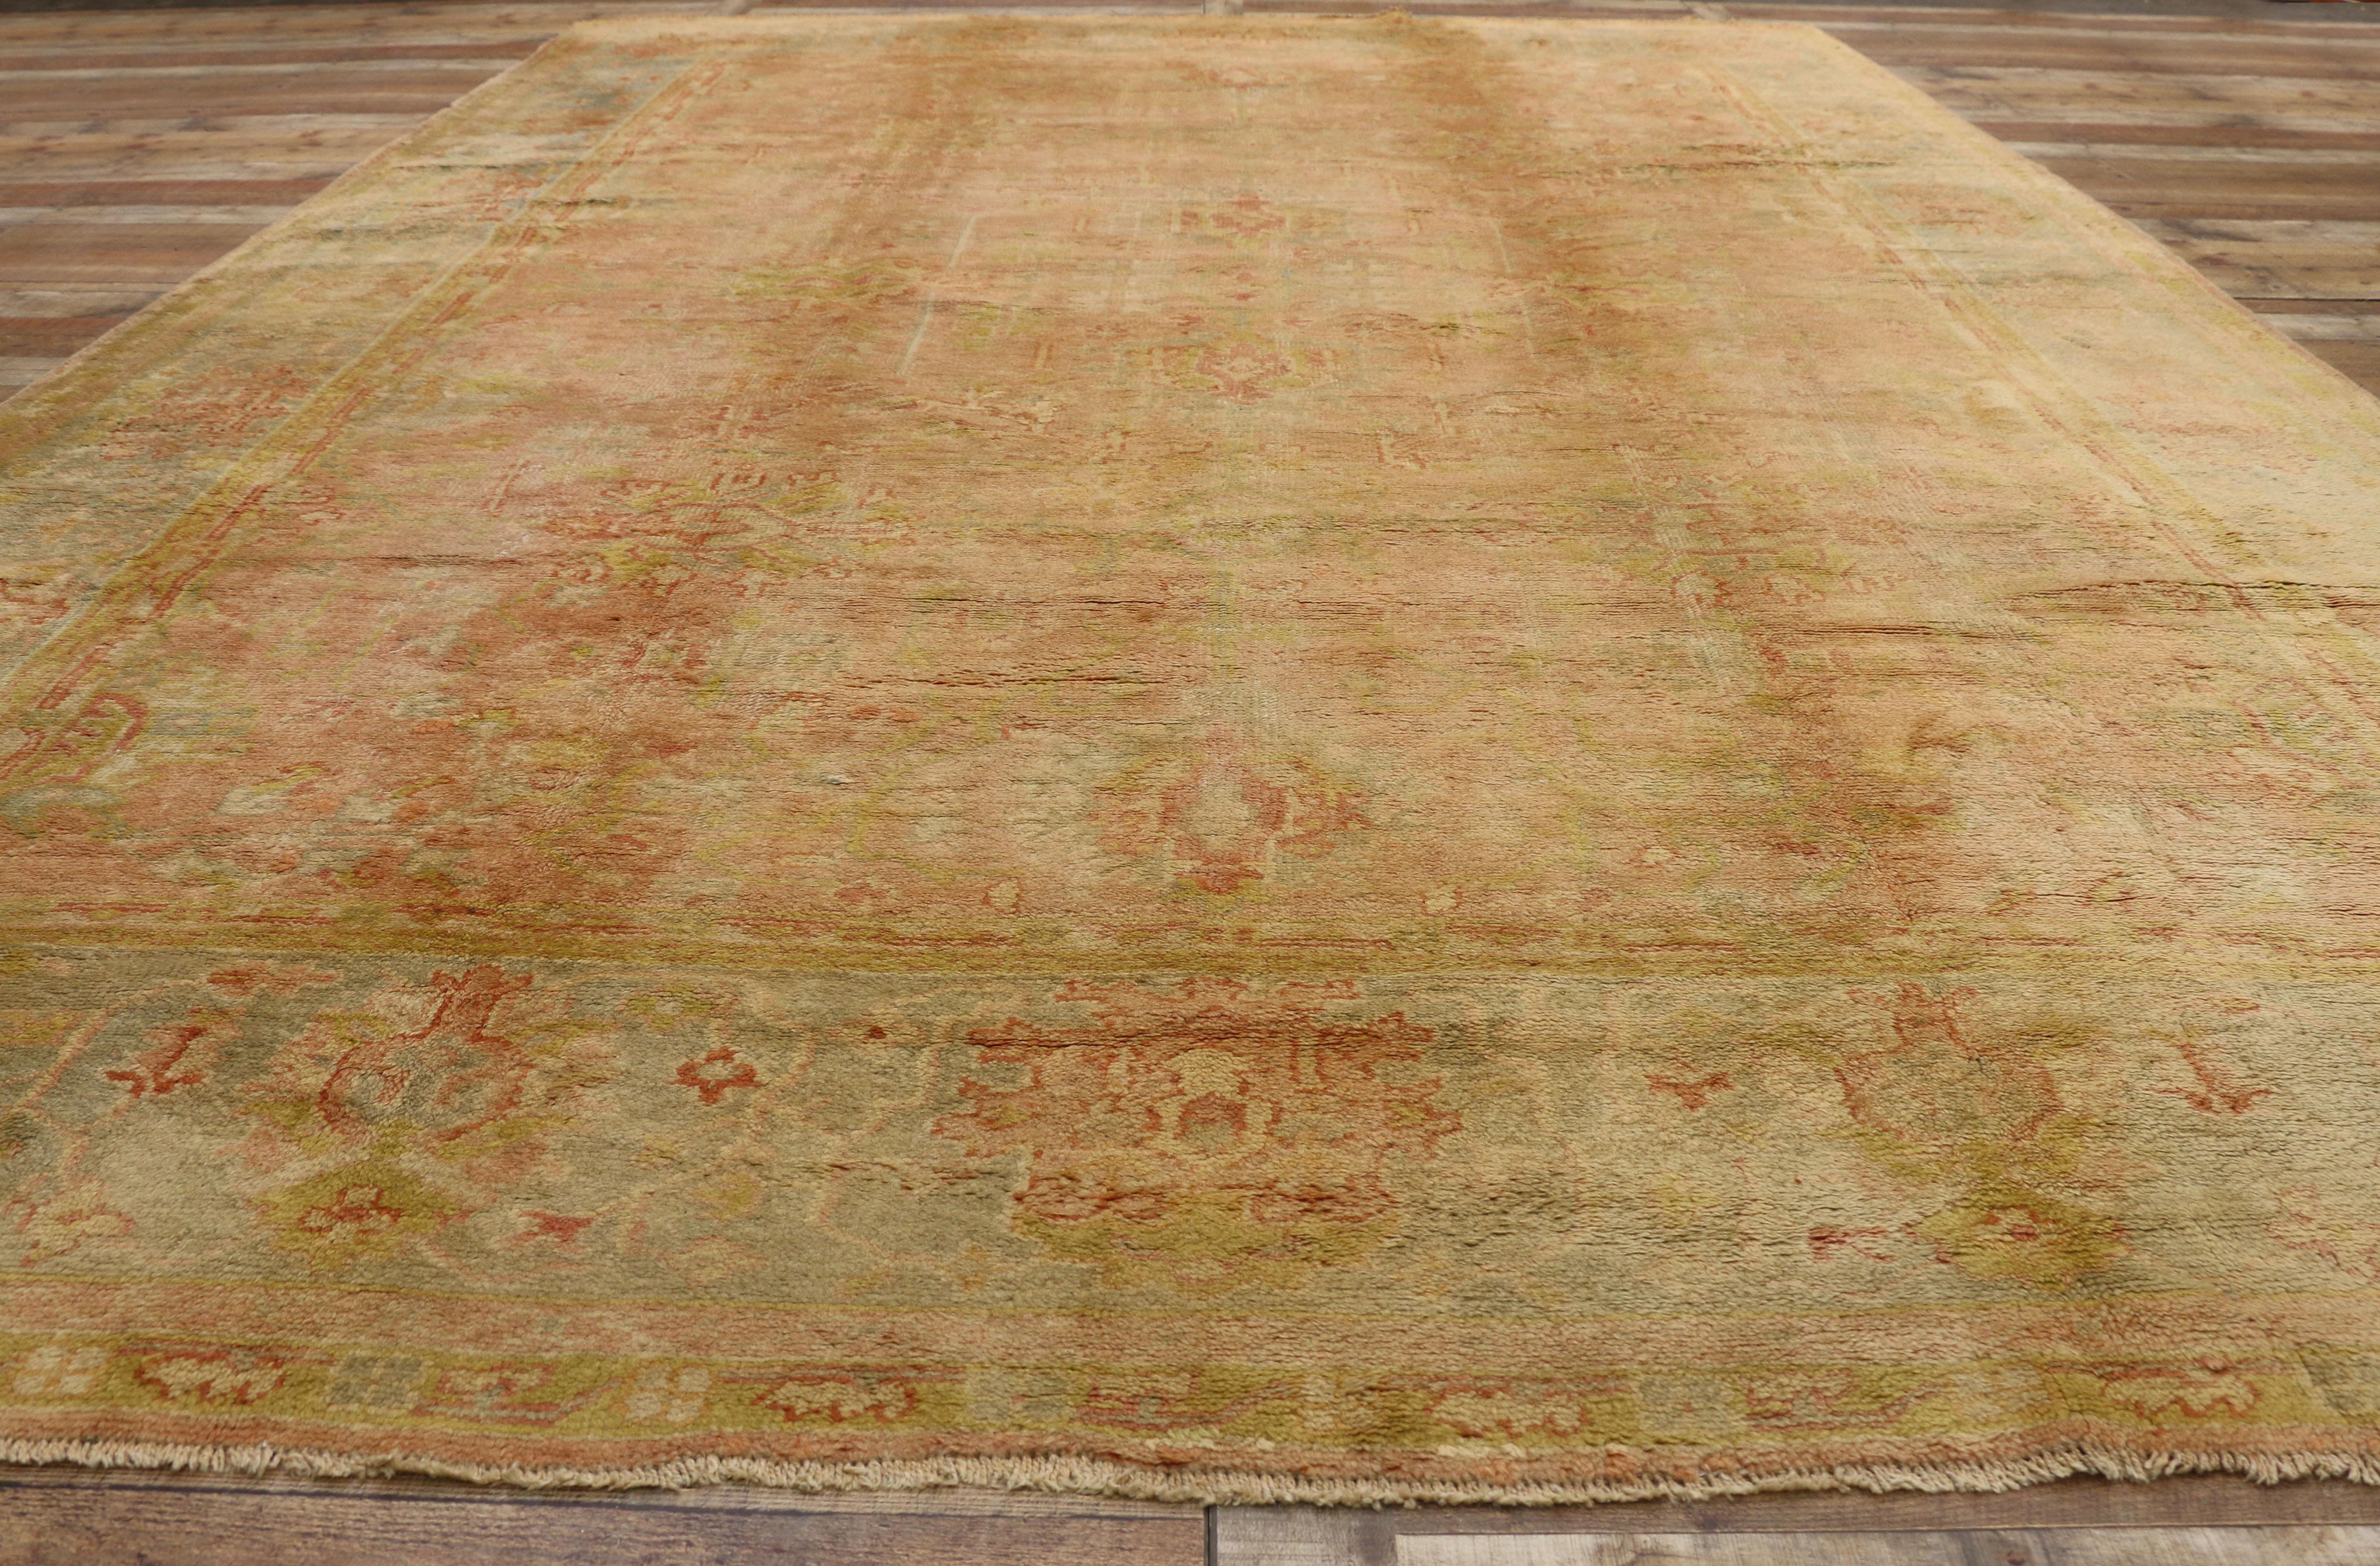 Wool Antique Turkish Oushak Rug, Spanish Eclectic Meets Sunbaked Elegance For Sale